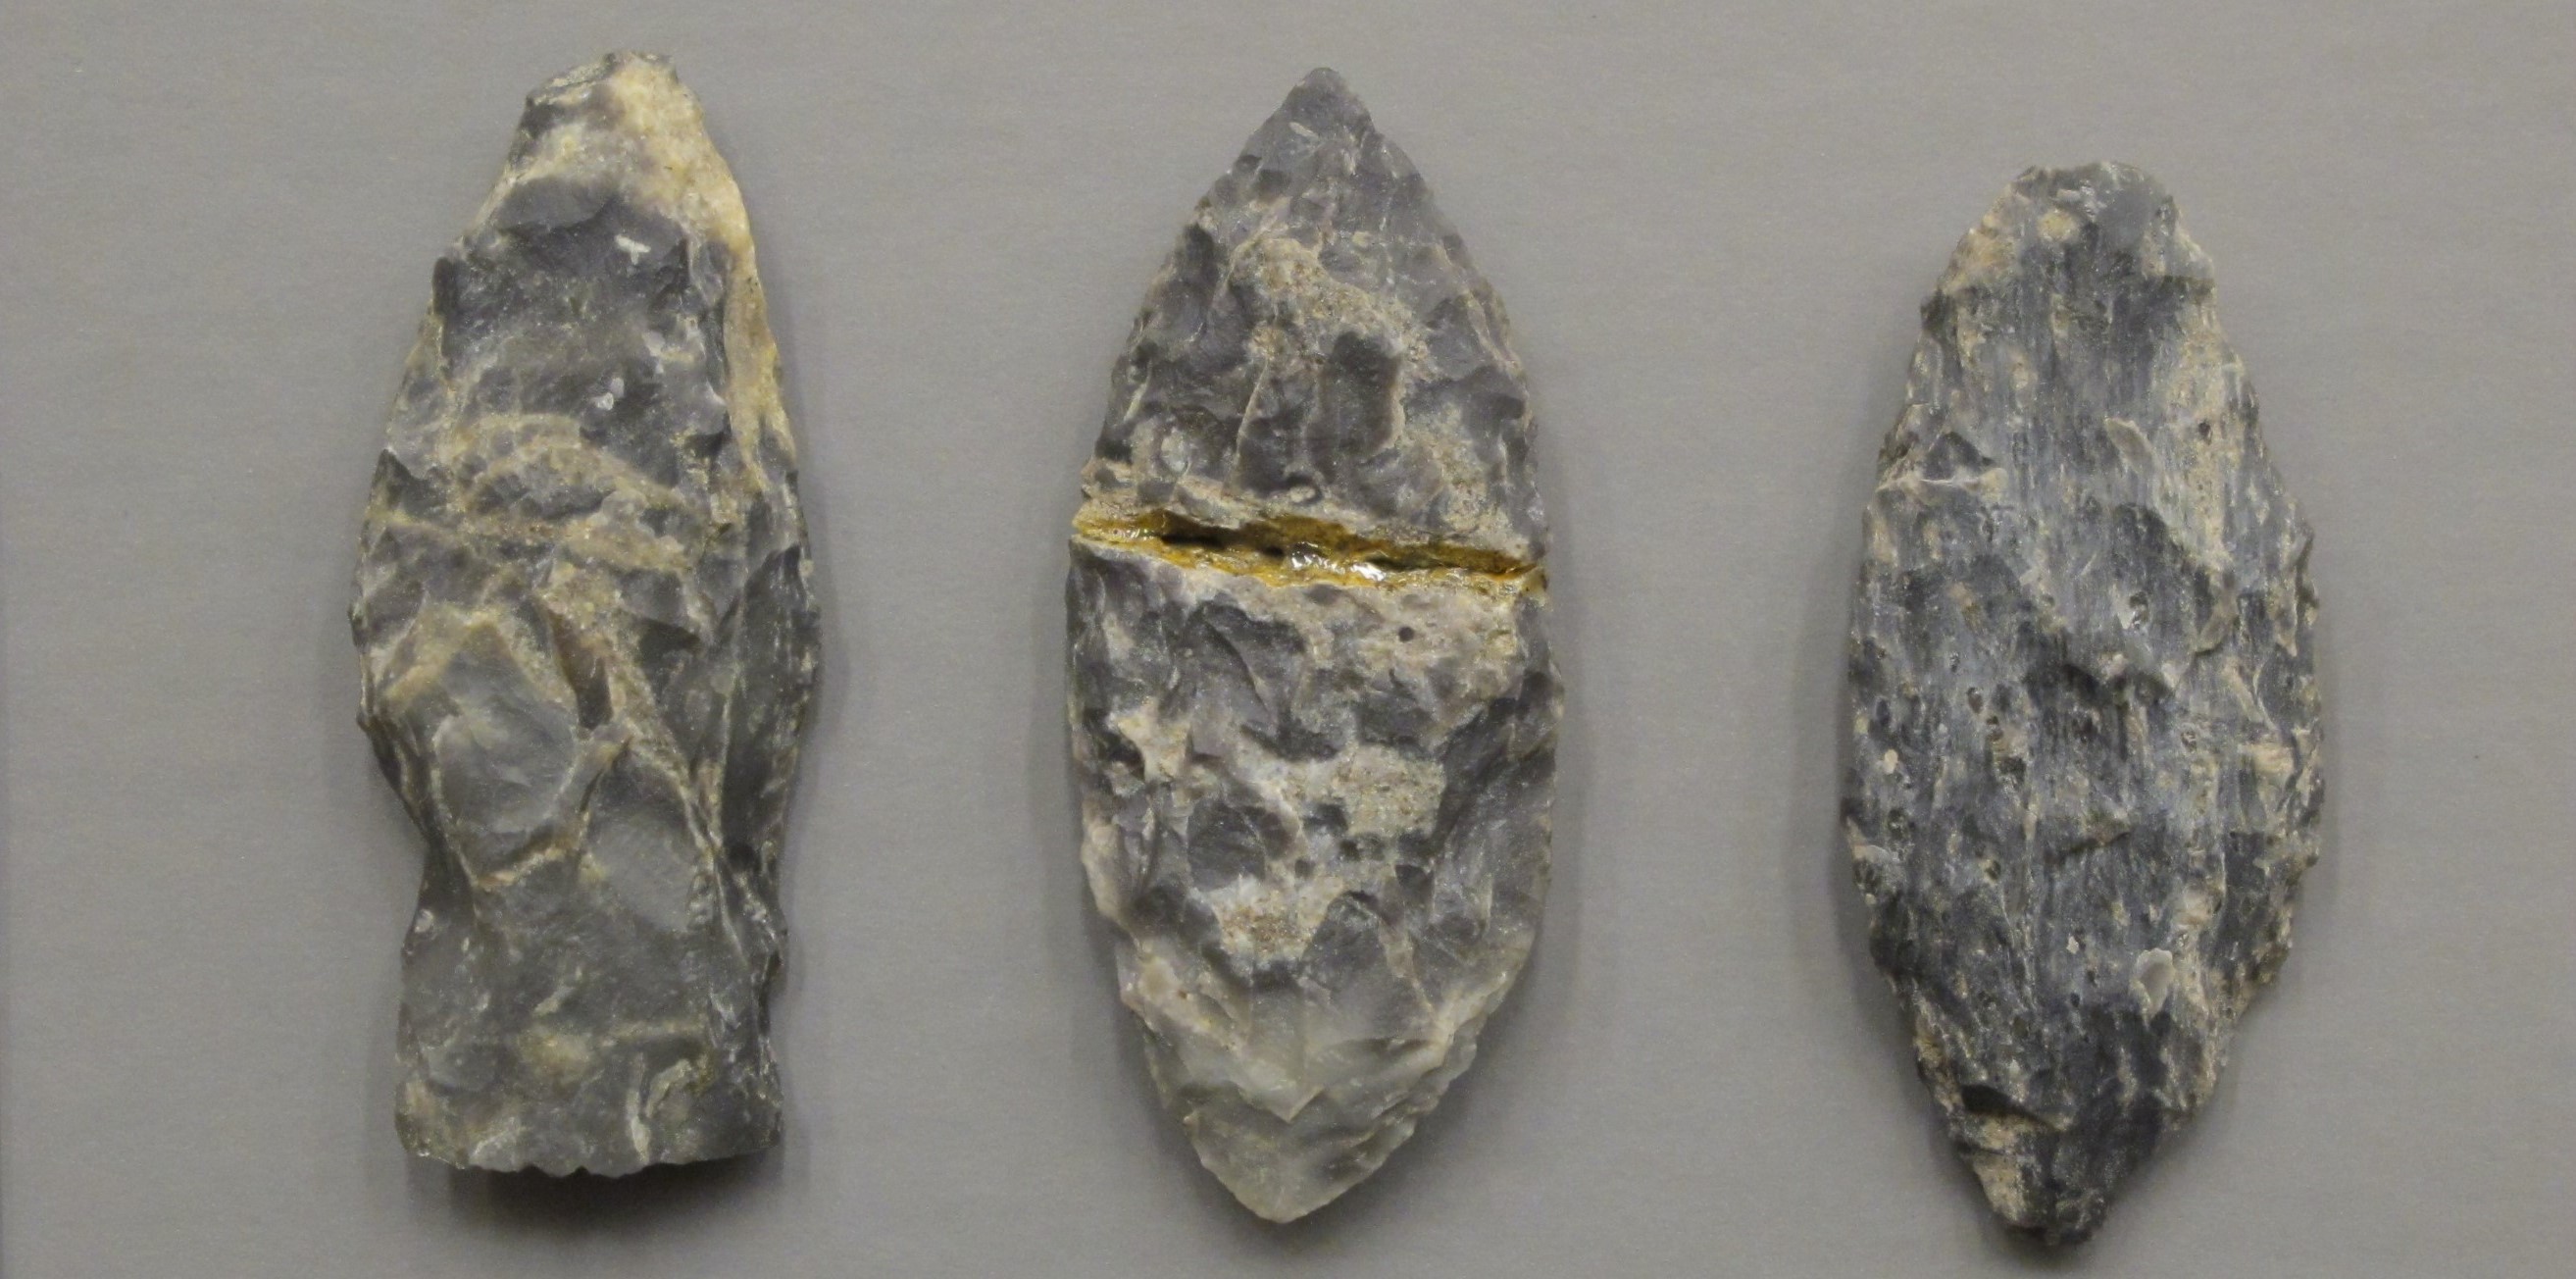 projectile points from the Sinnock site